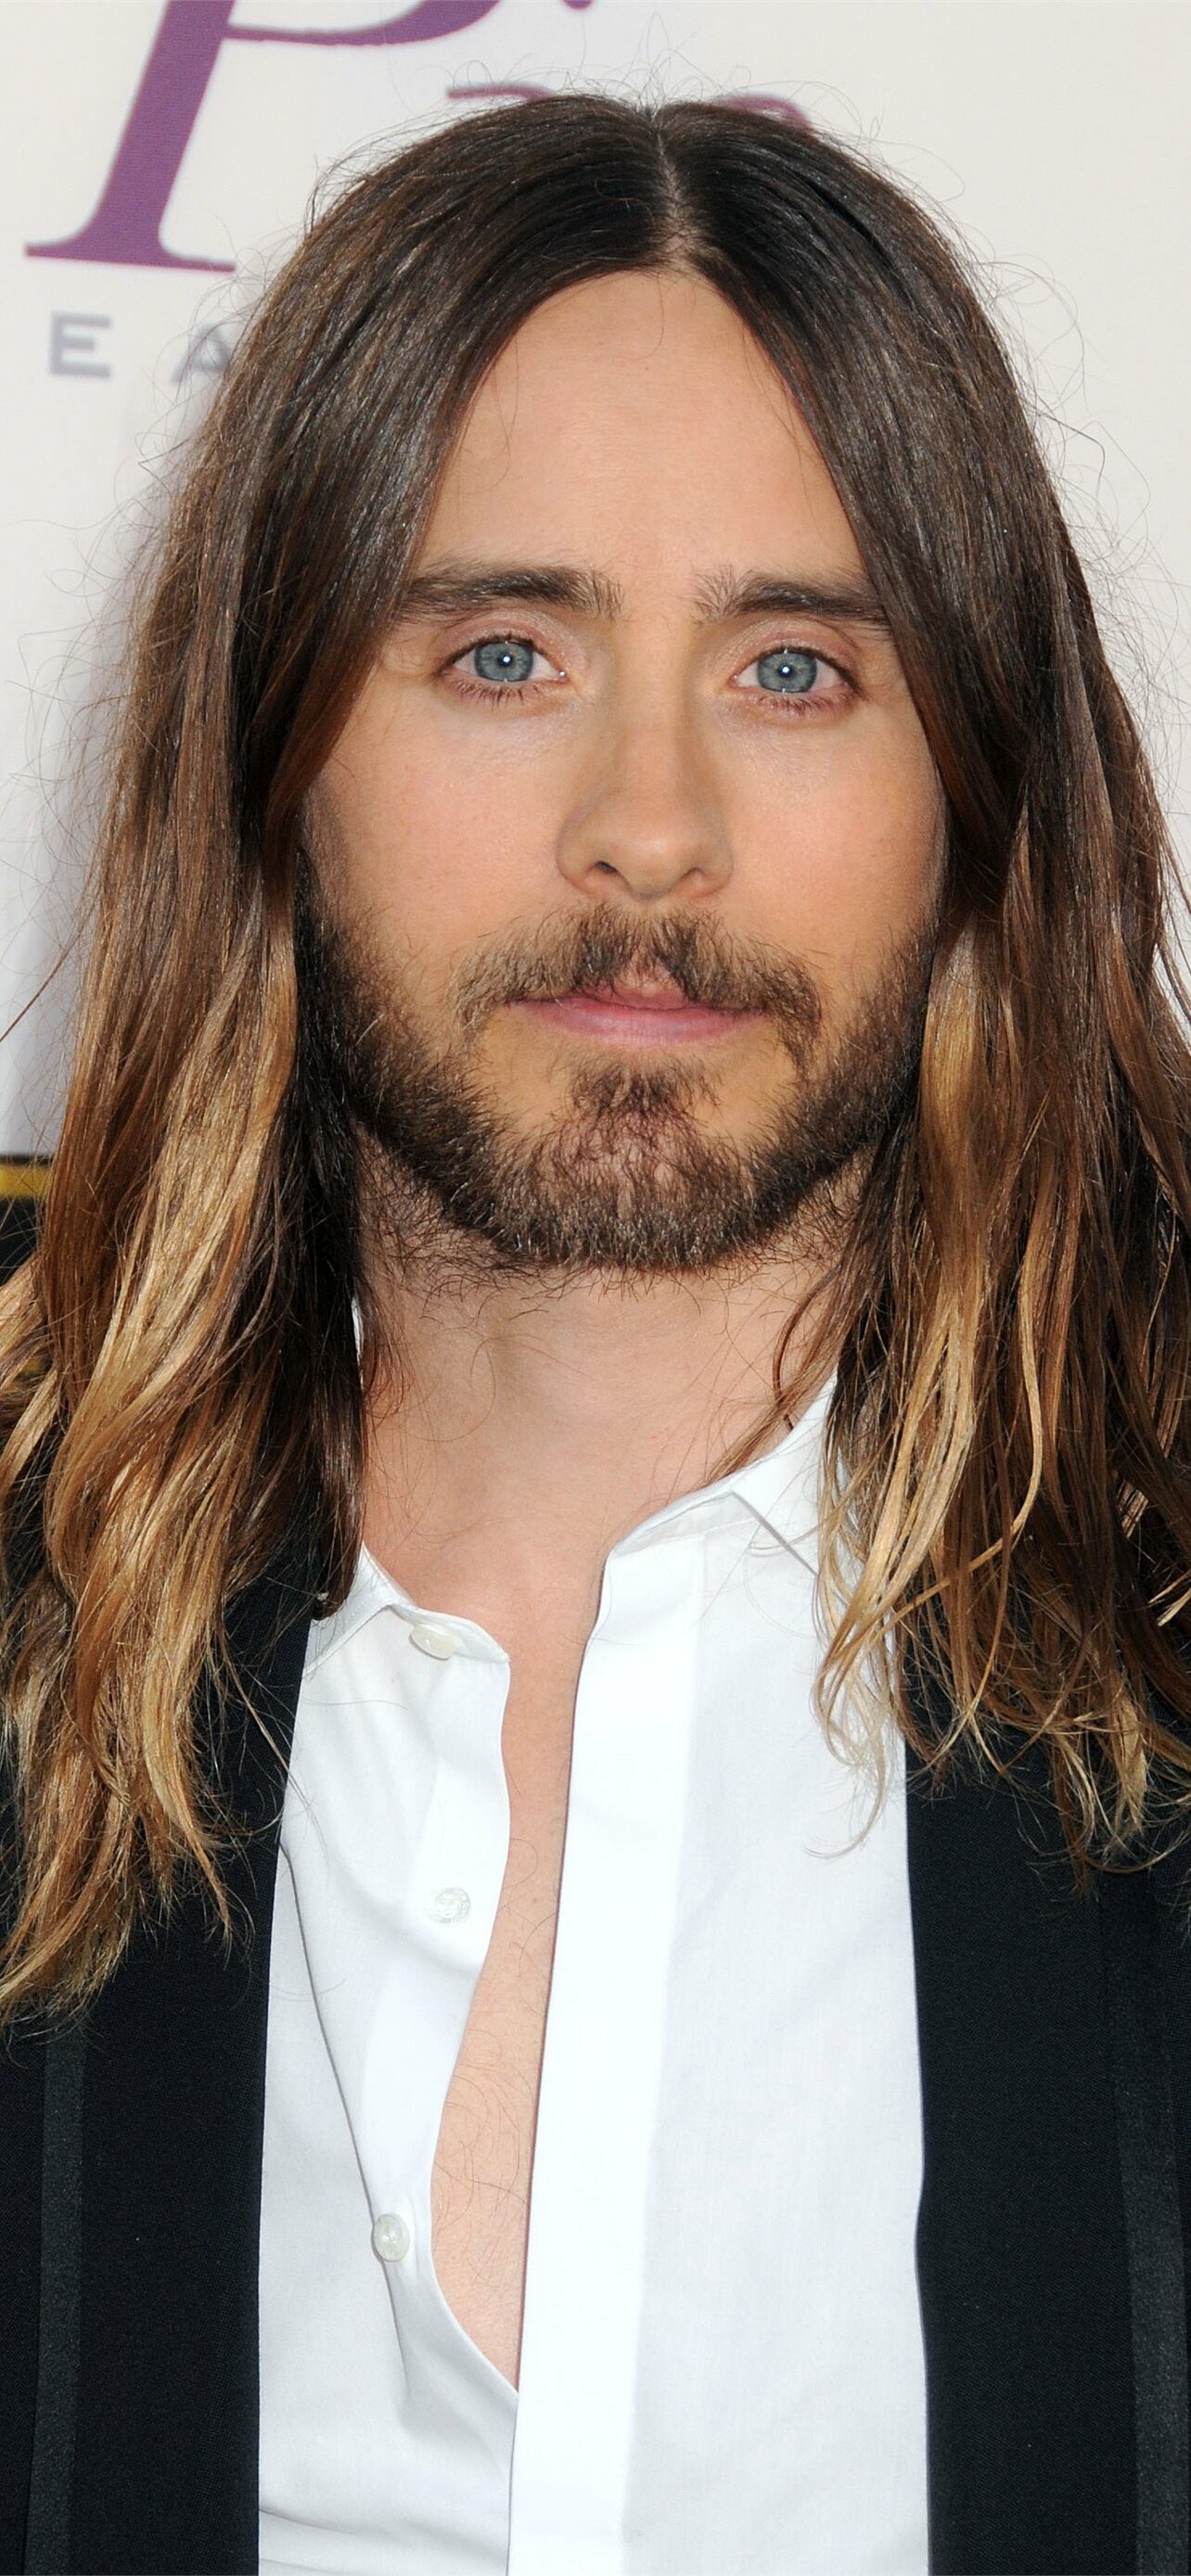 Jared Leto: Stepped away from his movie career to transform himself into a pop star, 2002. 1290x2780 HD Wallpaper.